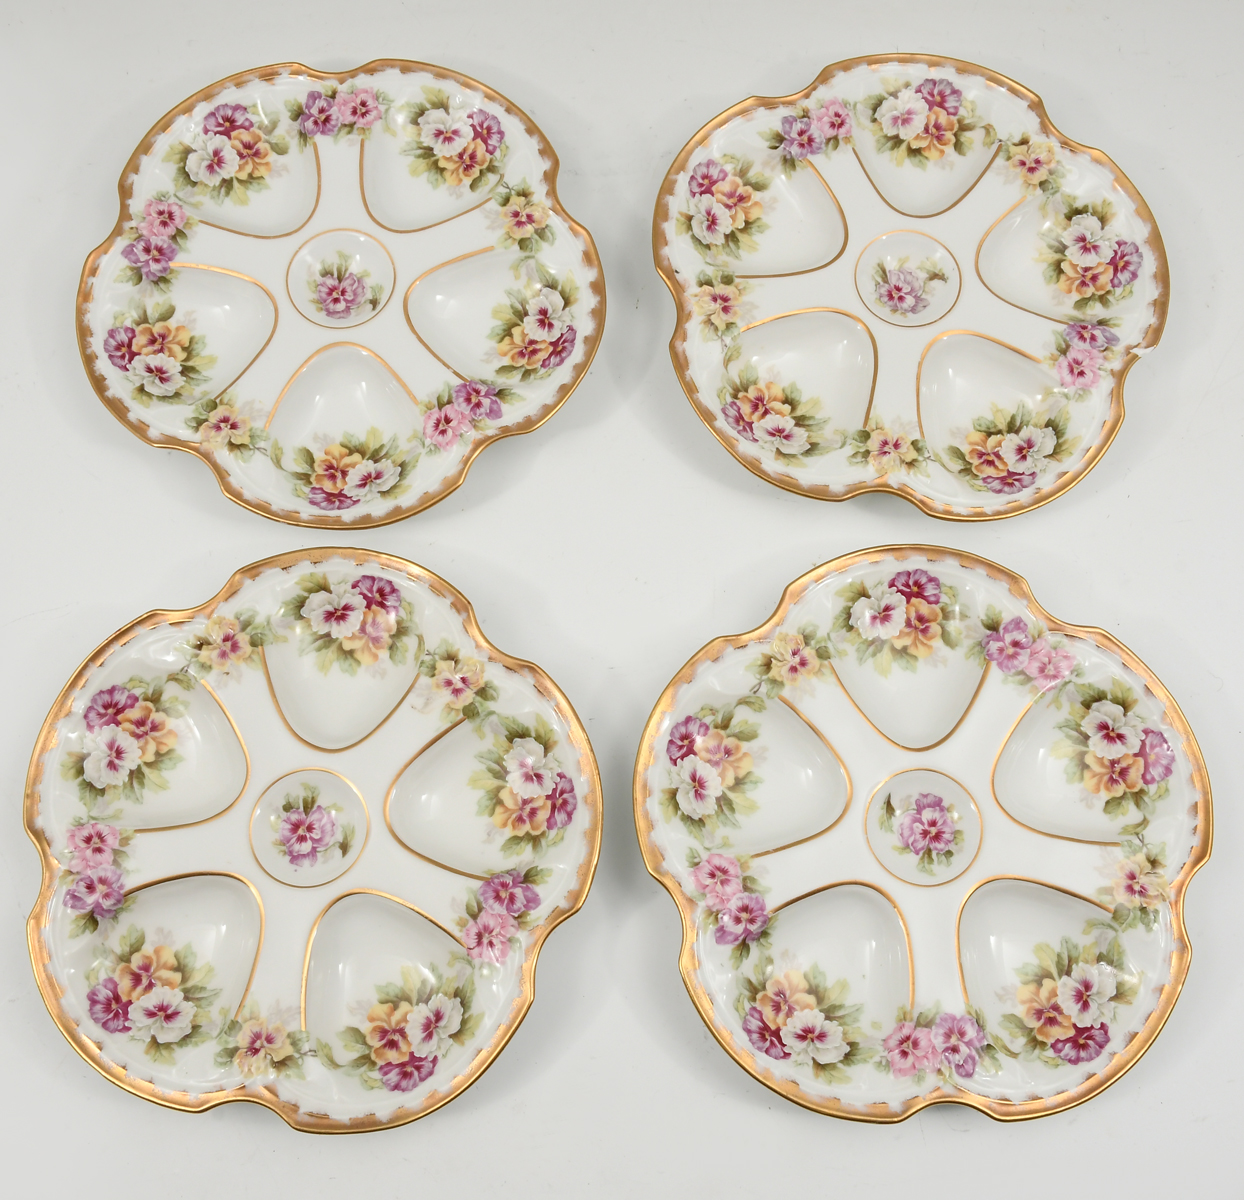 4 FRENCH LIMOGES OYSTER PLATES: